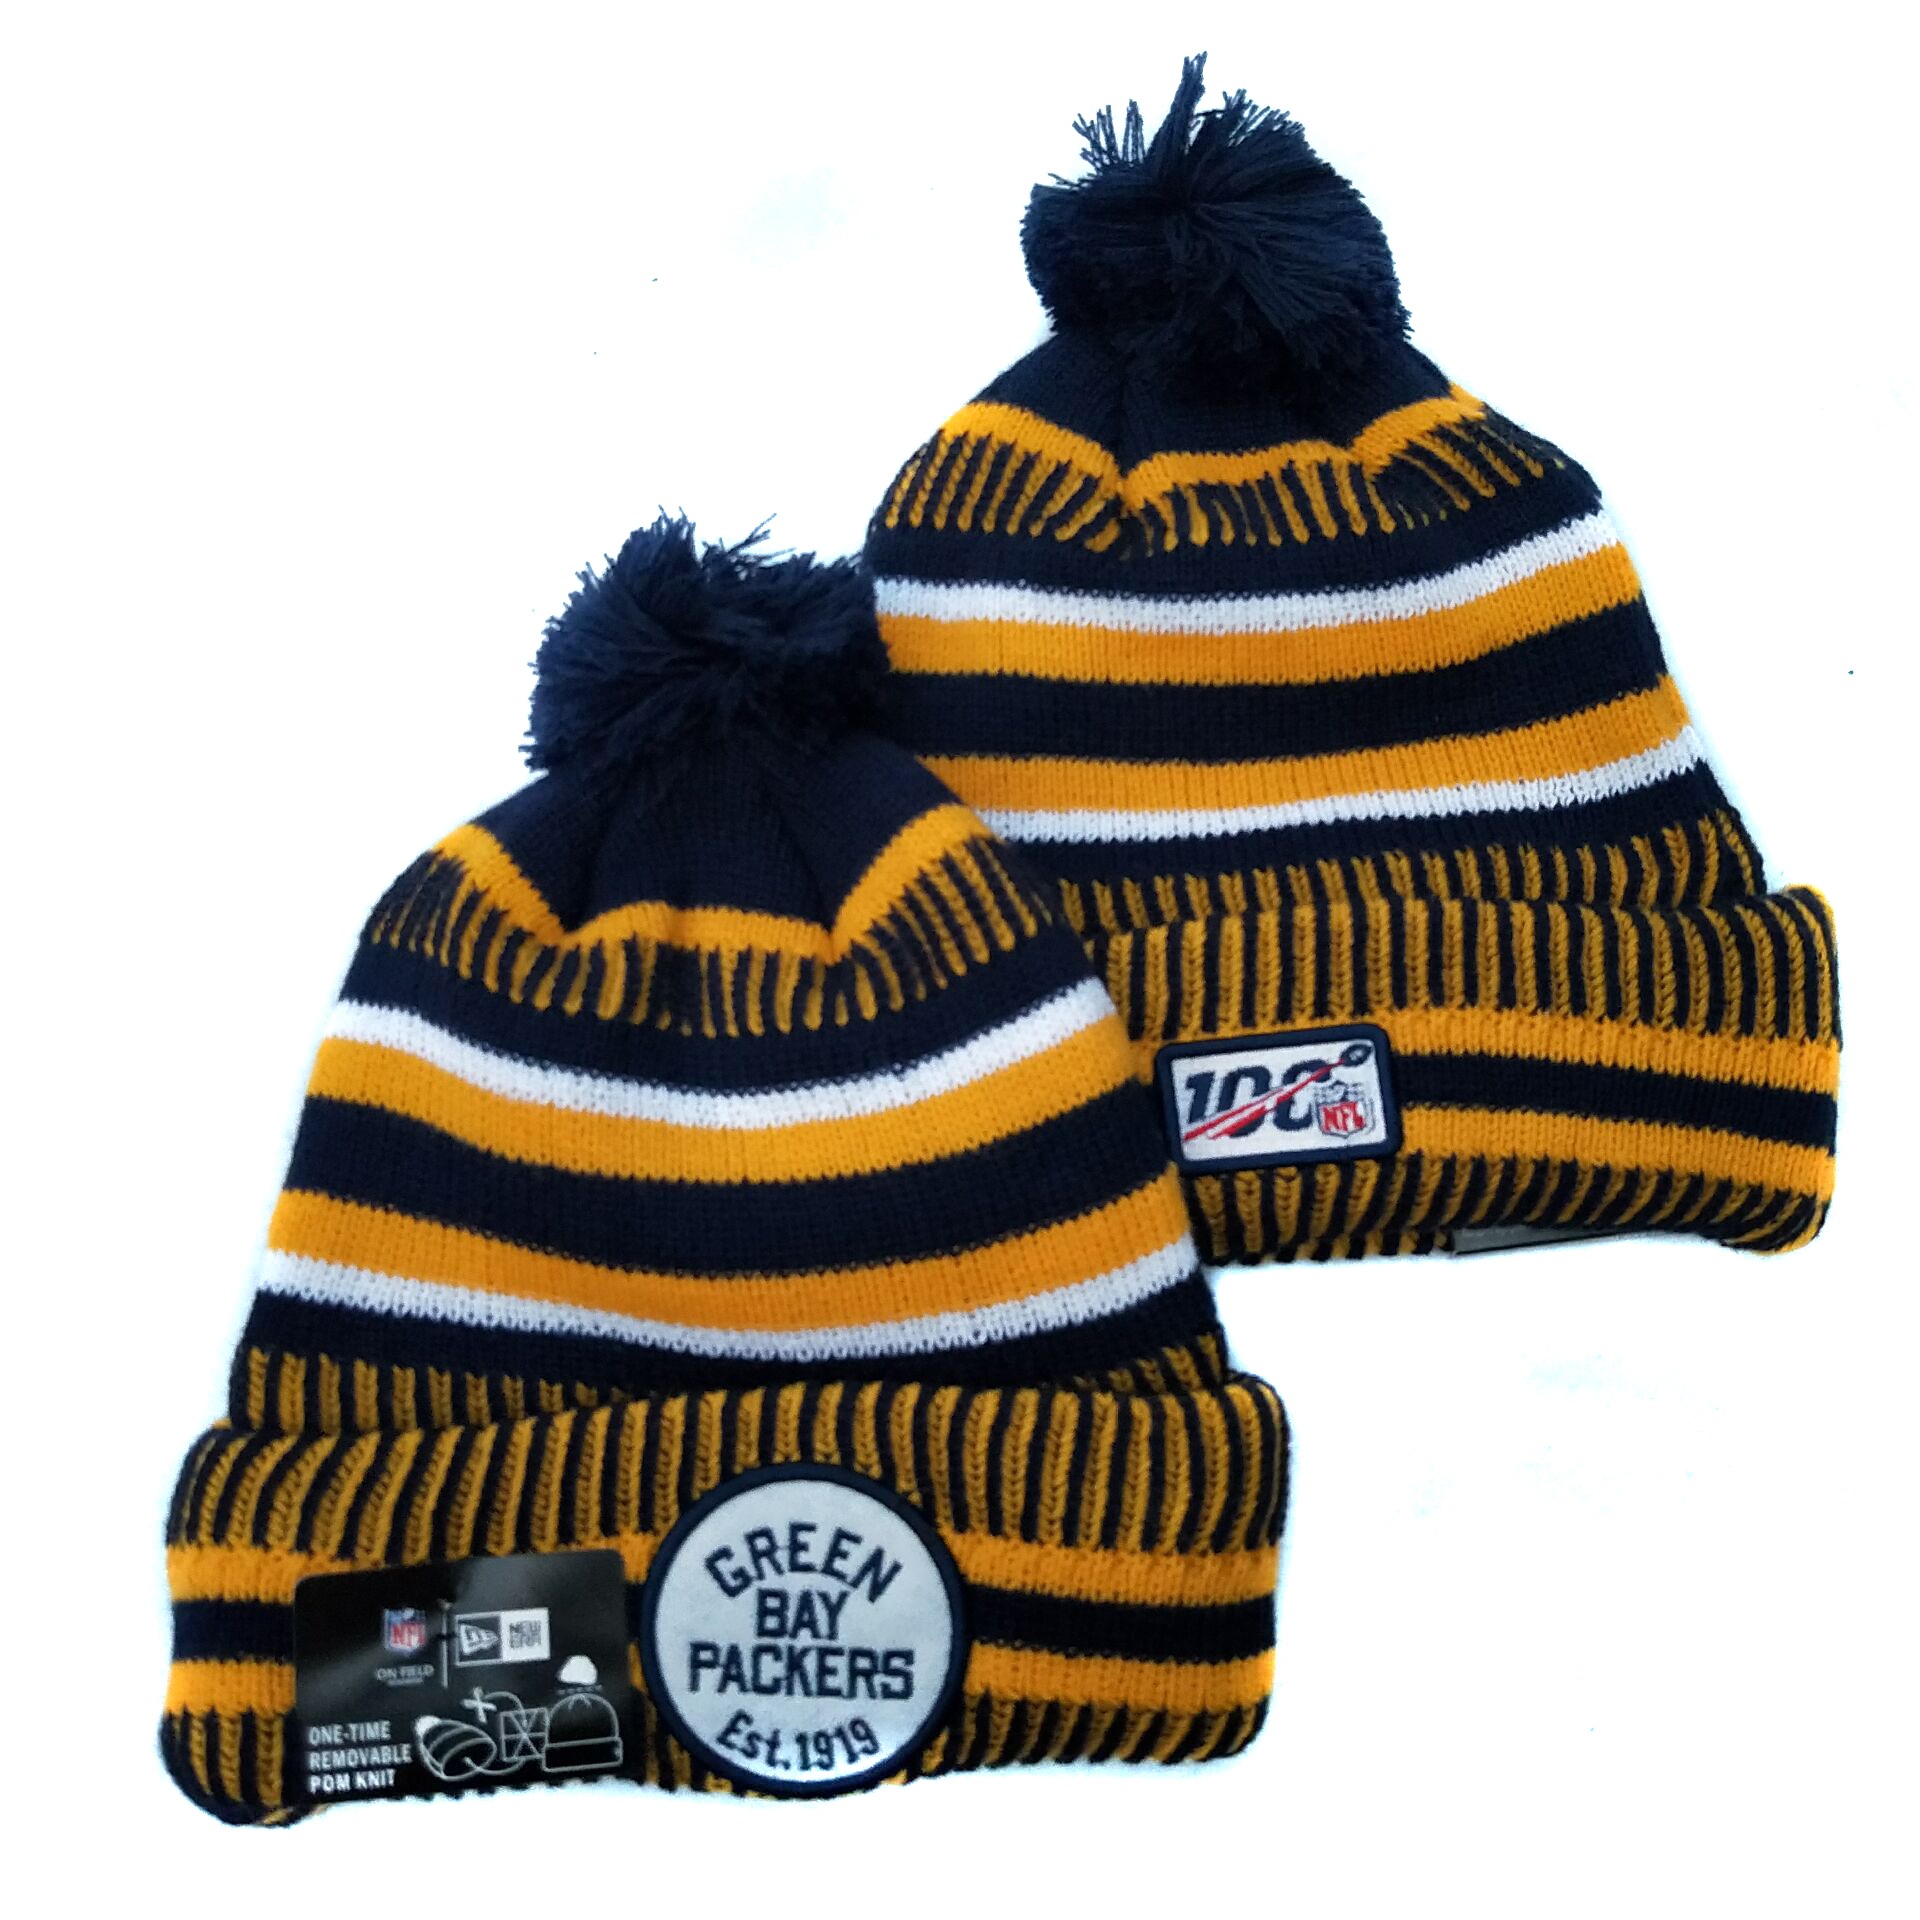 Green Bay Packers knit Hats 061